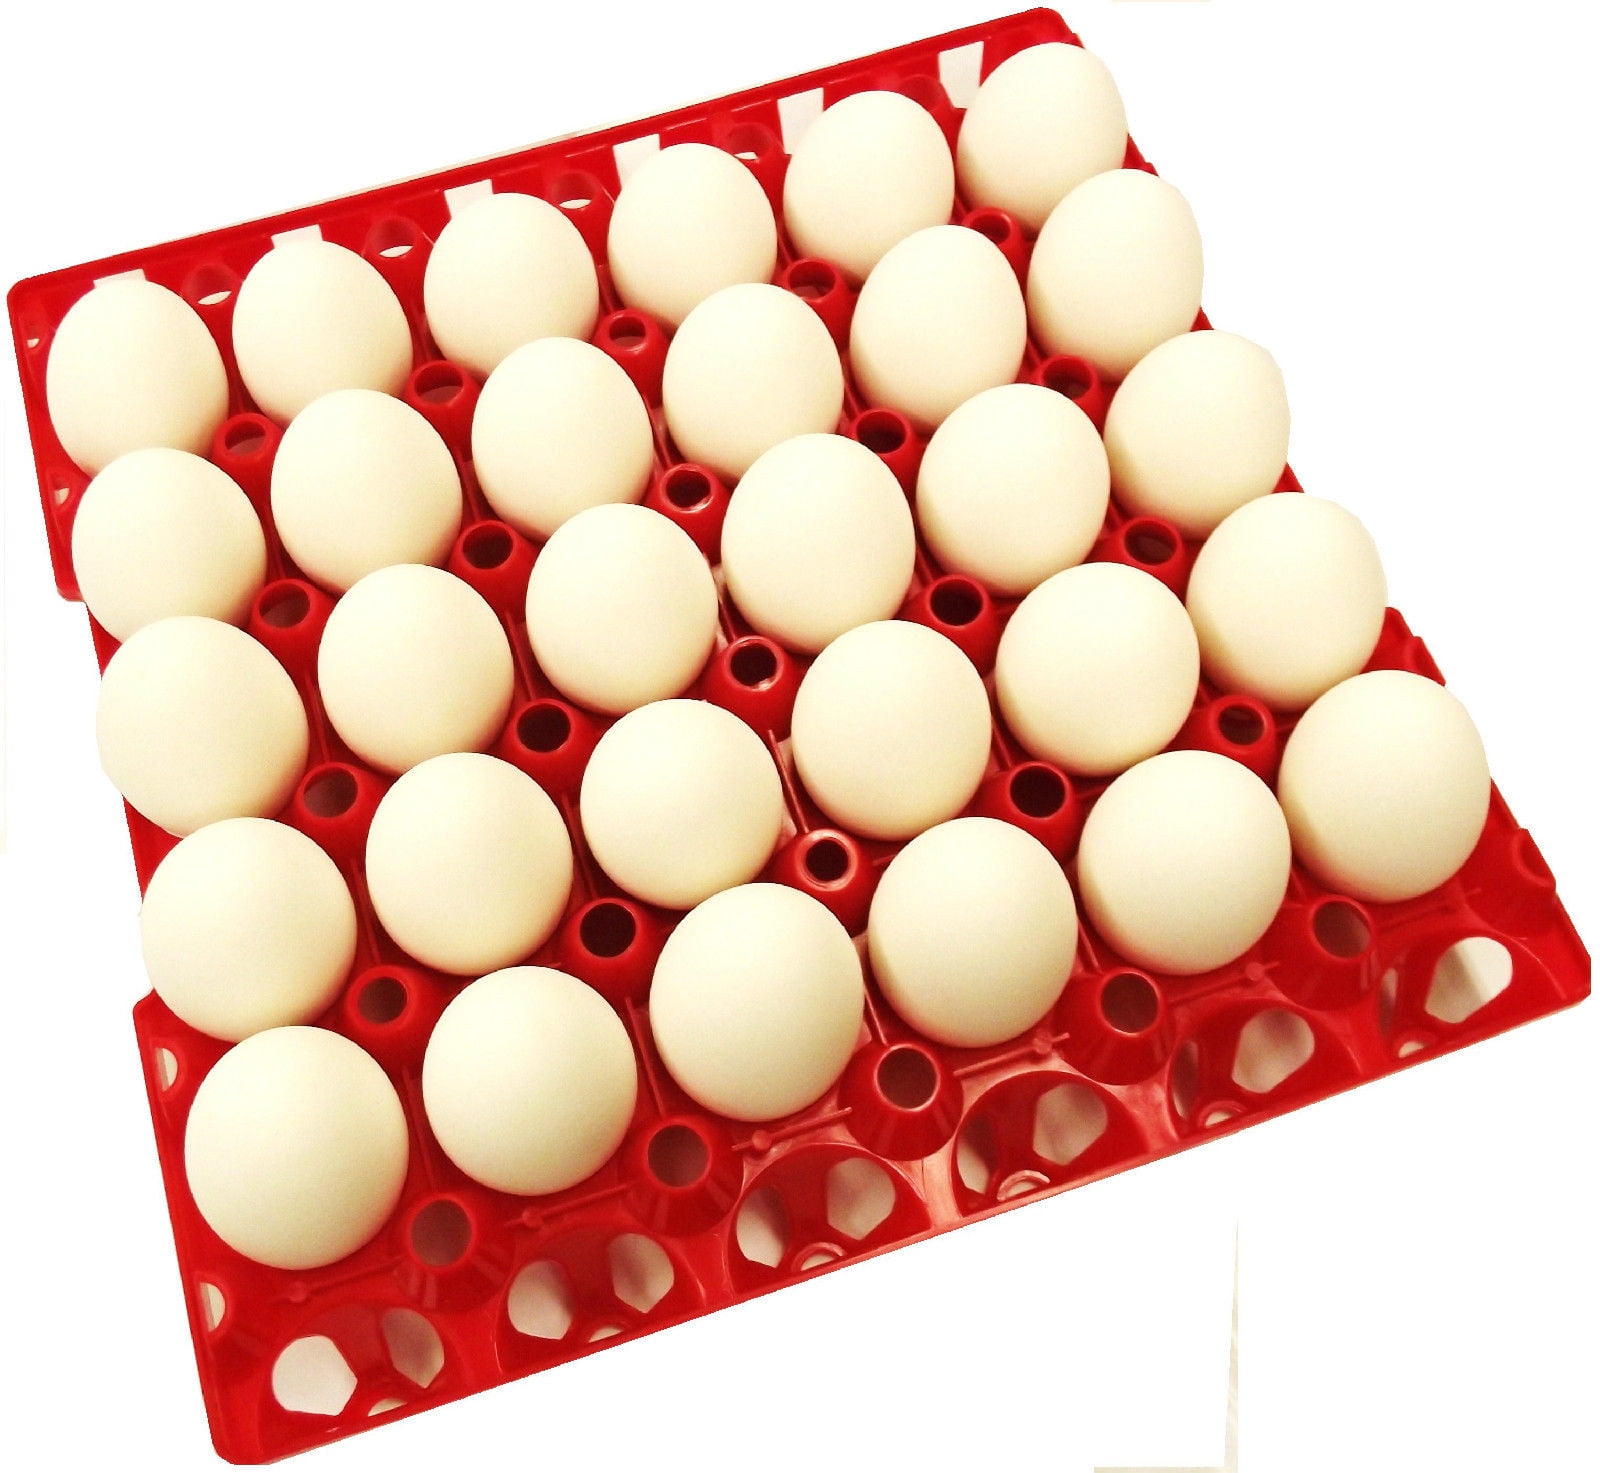 Pack of 5 30 Eggs Tray Chicken Duck Quail Bird Poultry Plastic Tray 